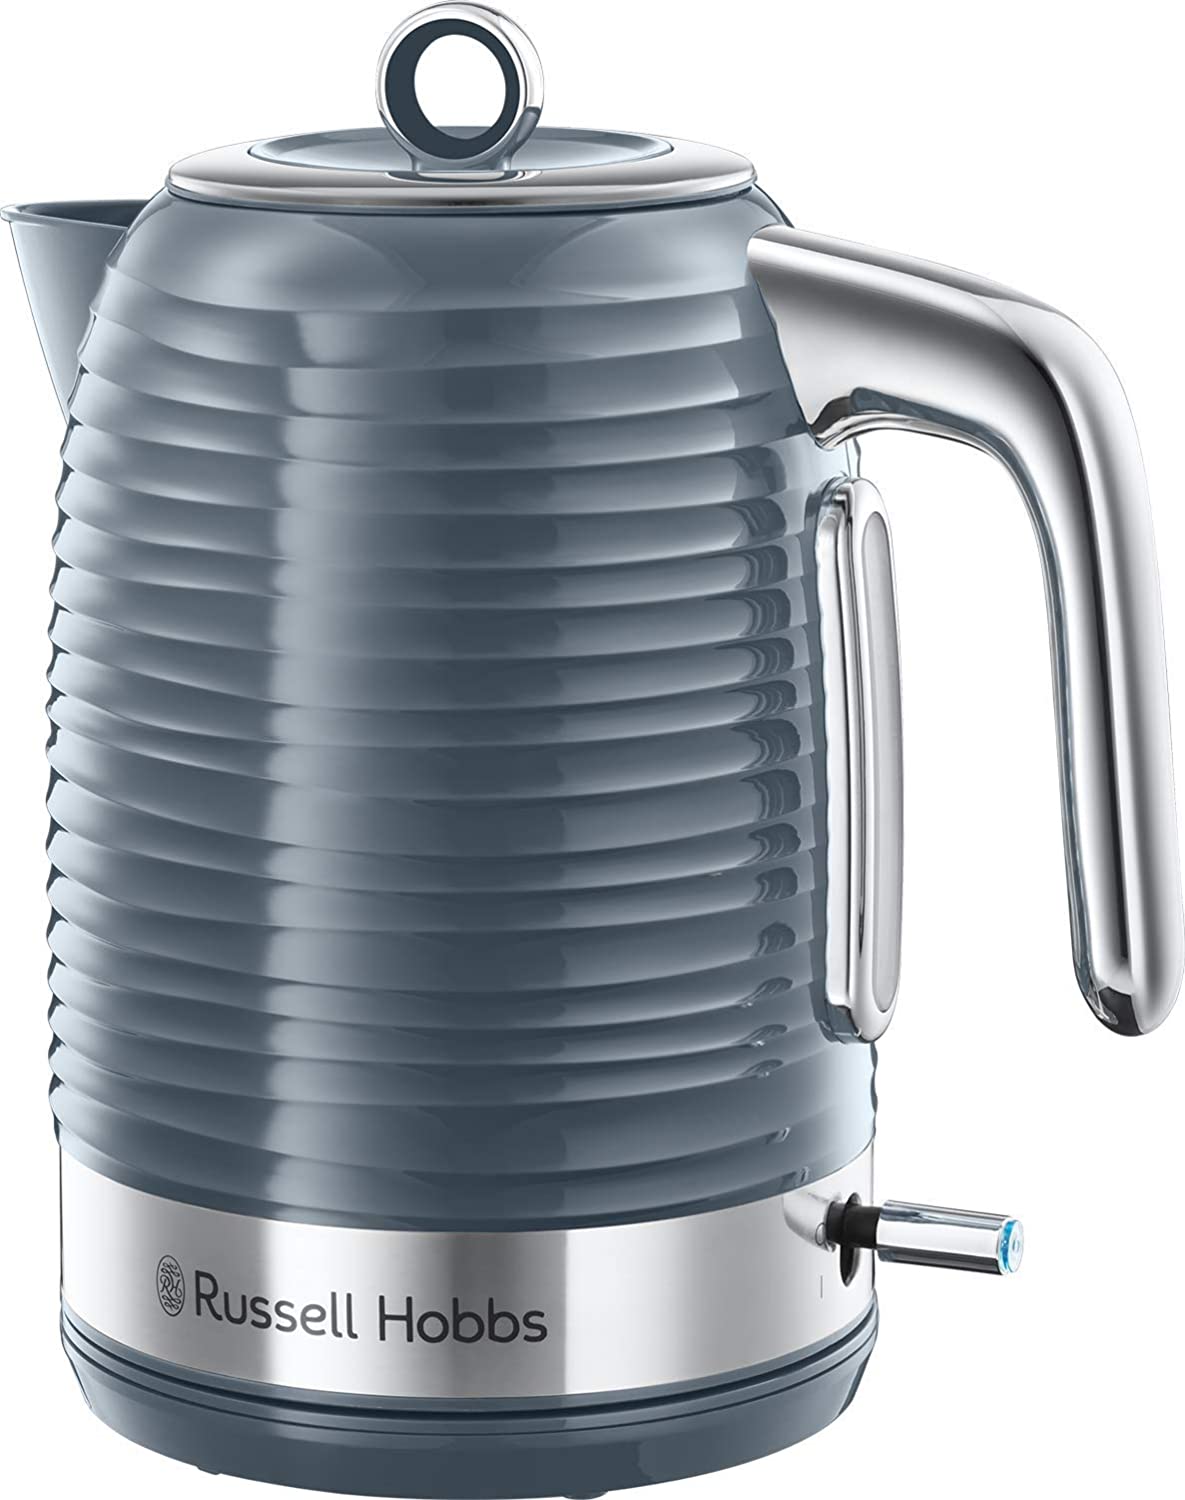 Russell Hobbs Inspire Kettle, Grey, 1.7 litres, 2400 W, Quick Boil Function, Optimised Pouring Spout, Removable Limescale Filter, Water Level Indicator, Tea Maker 24363-70 [Amazon Exclusive]